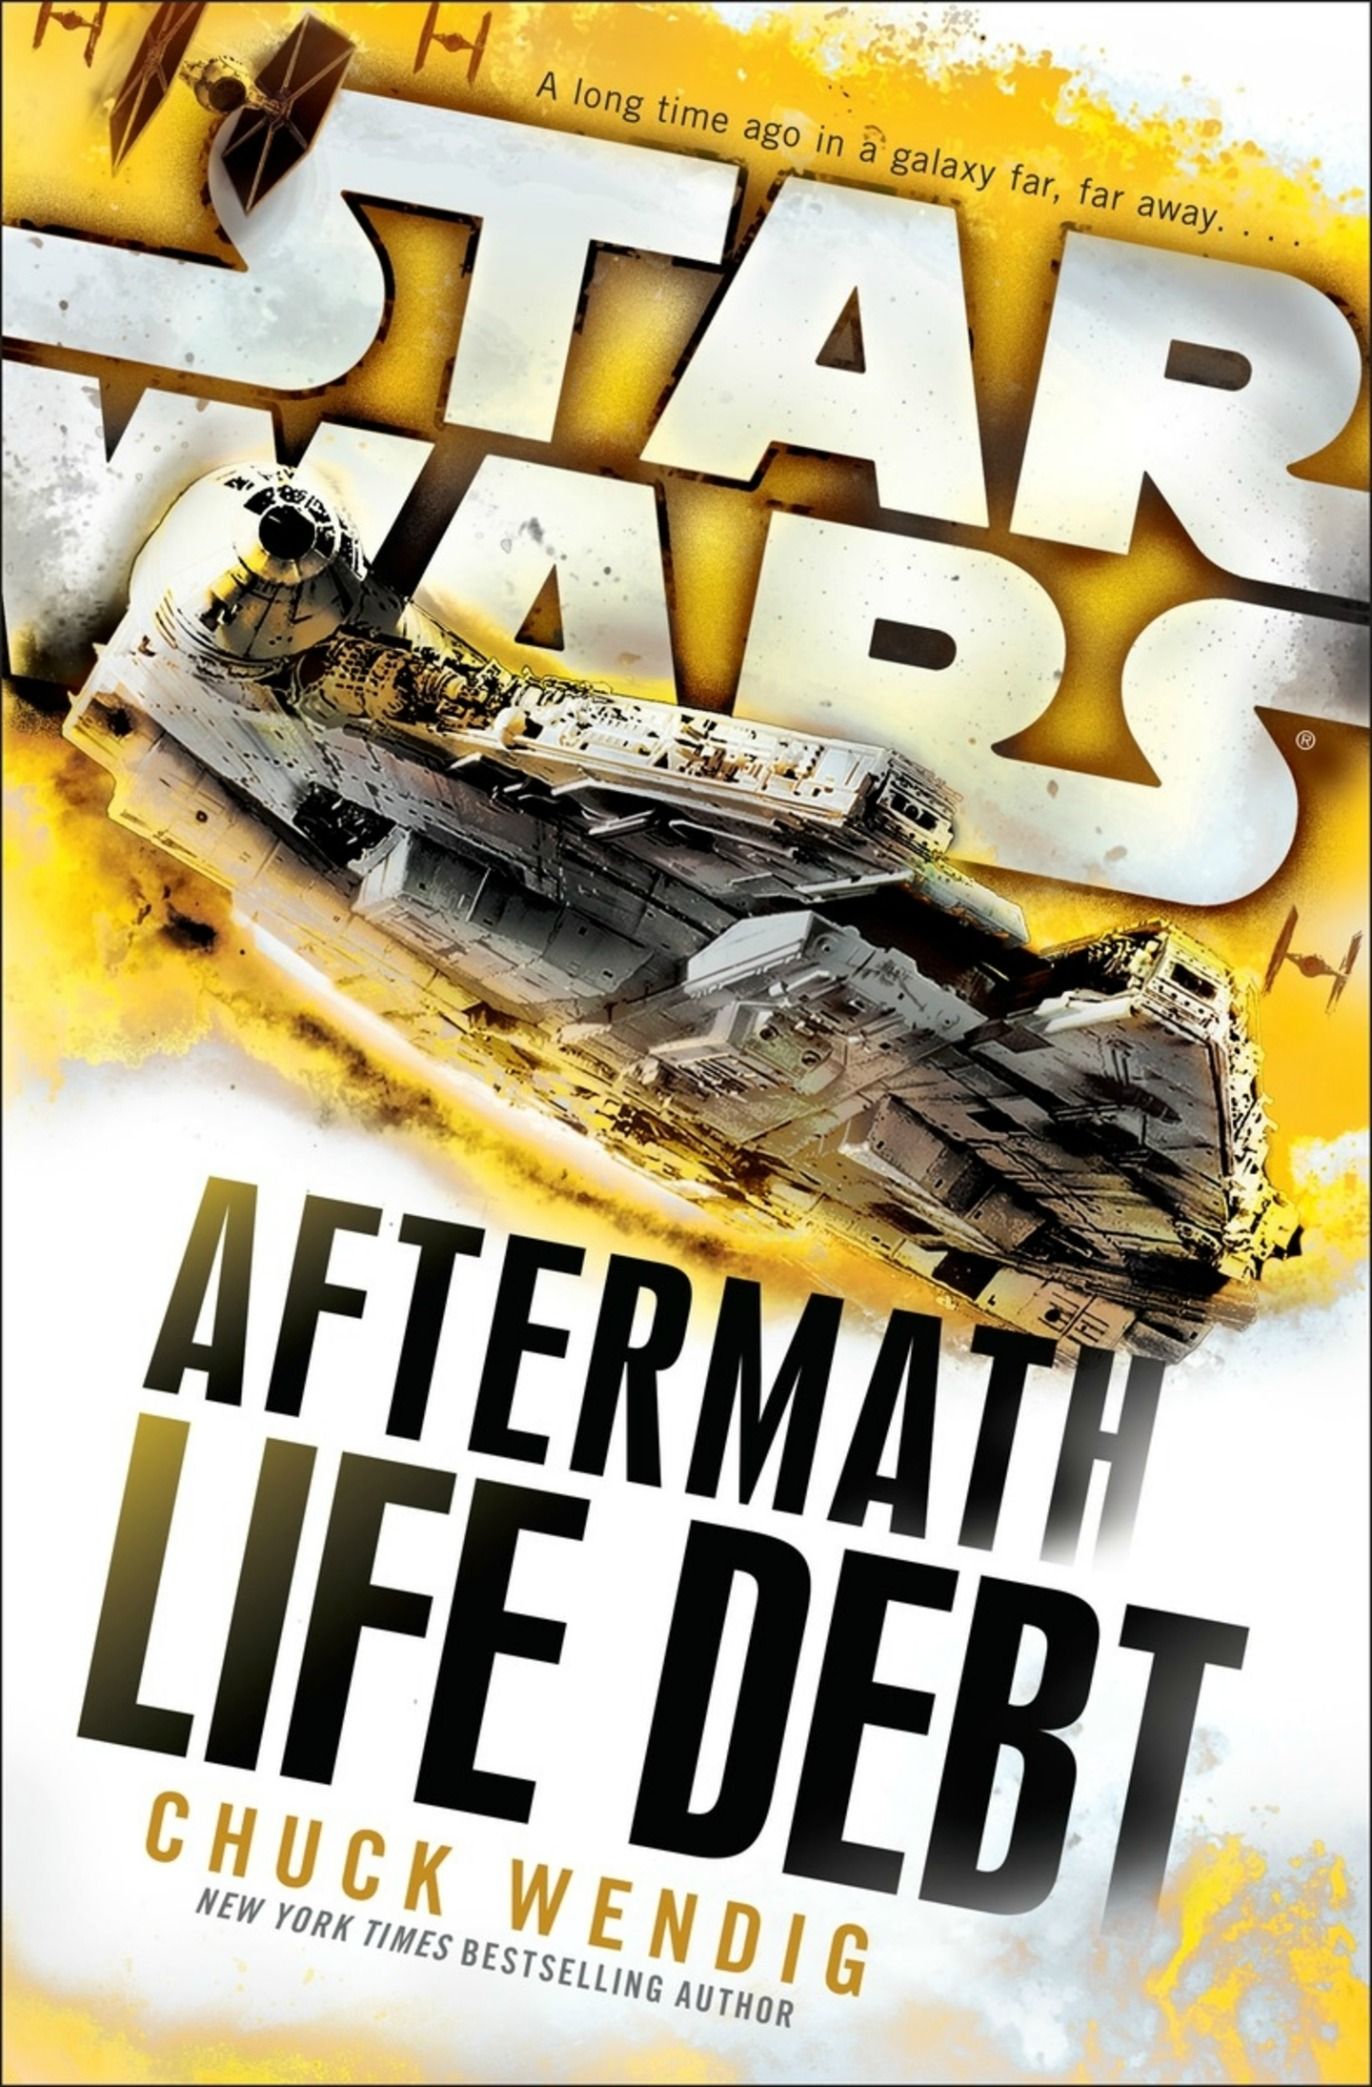 Star Wars: Aftermath - Life Debt book cover